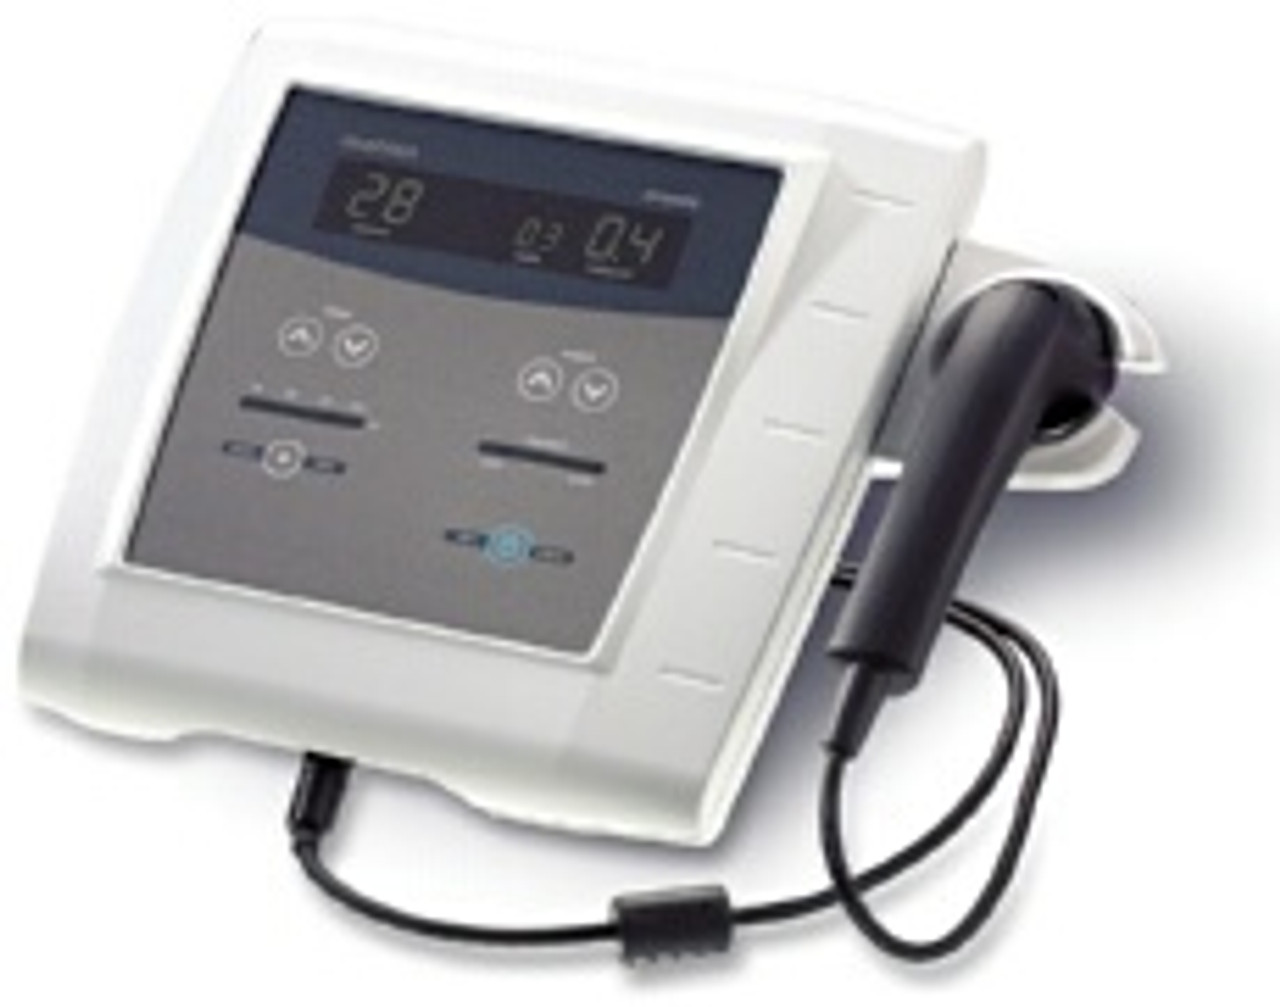 The Accusonic Ultrasound is on Sale now at a very low discount price ...